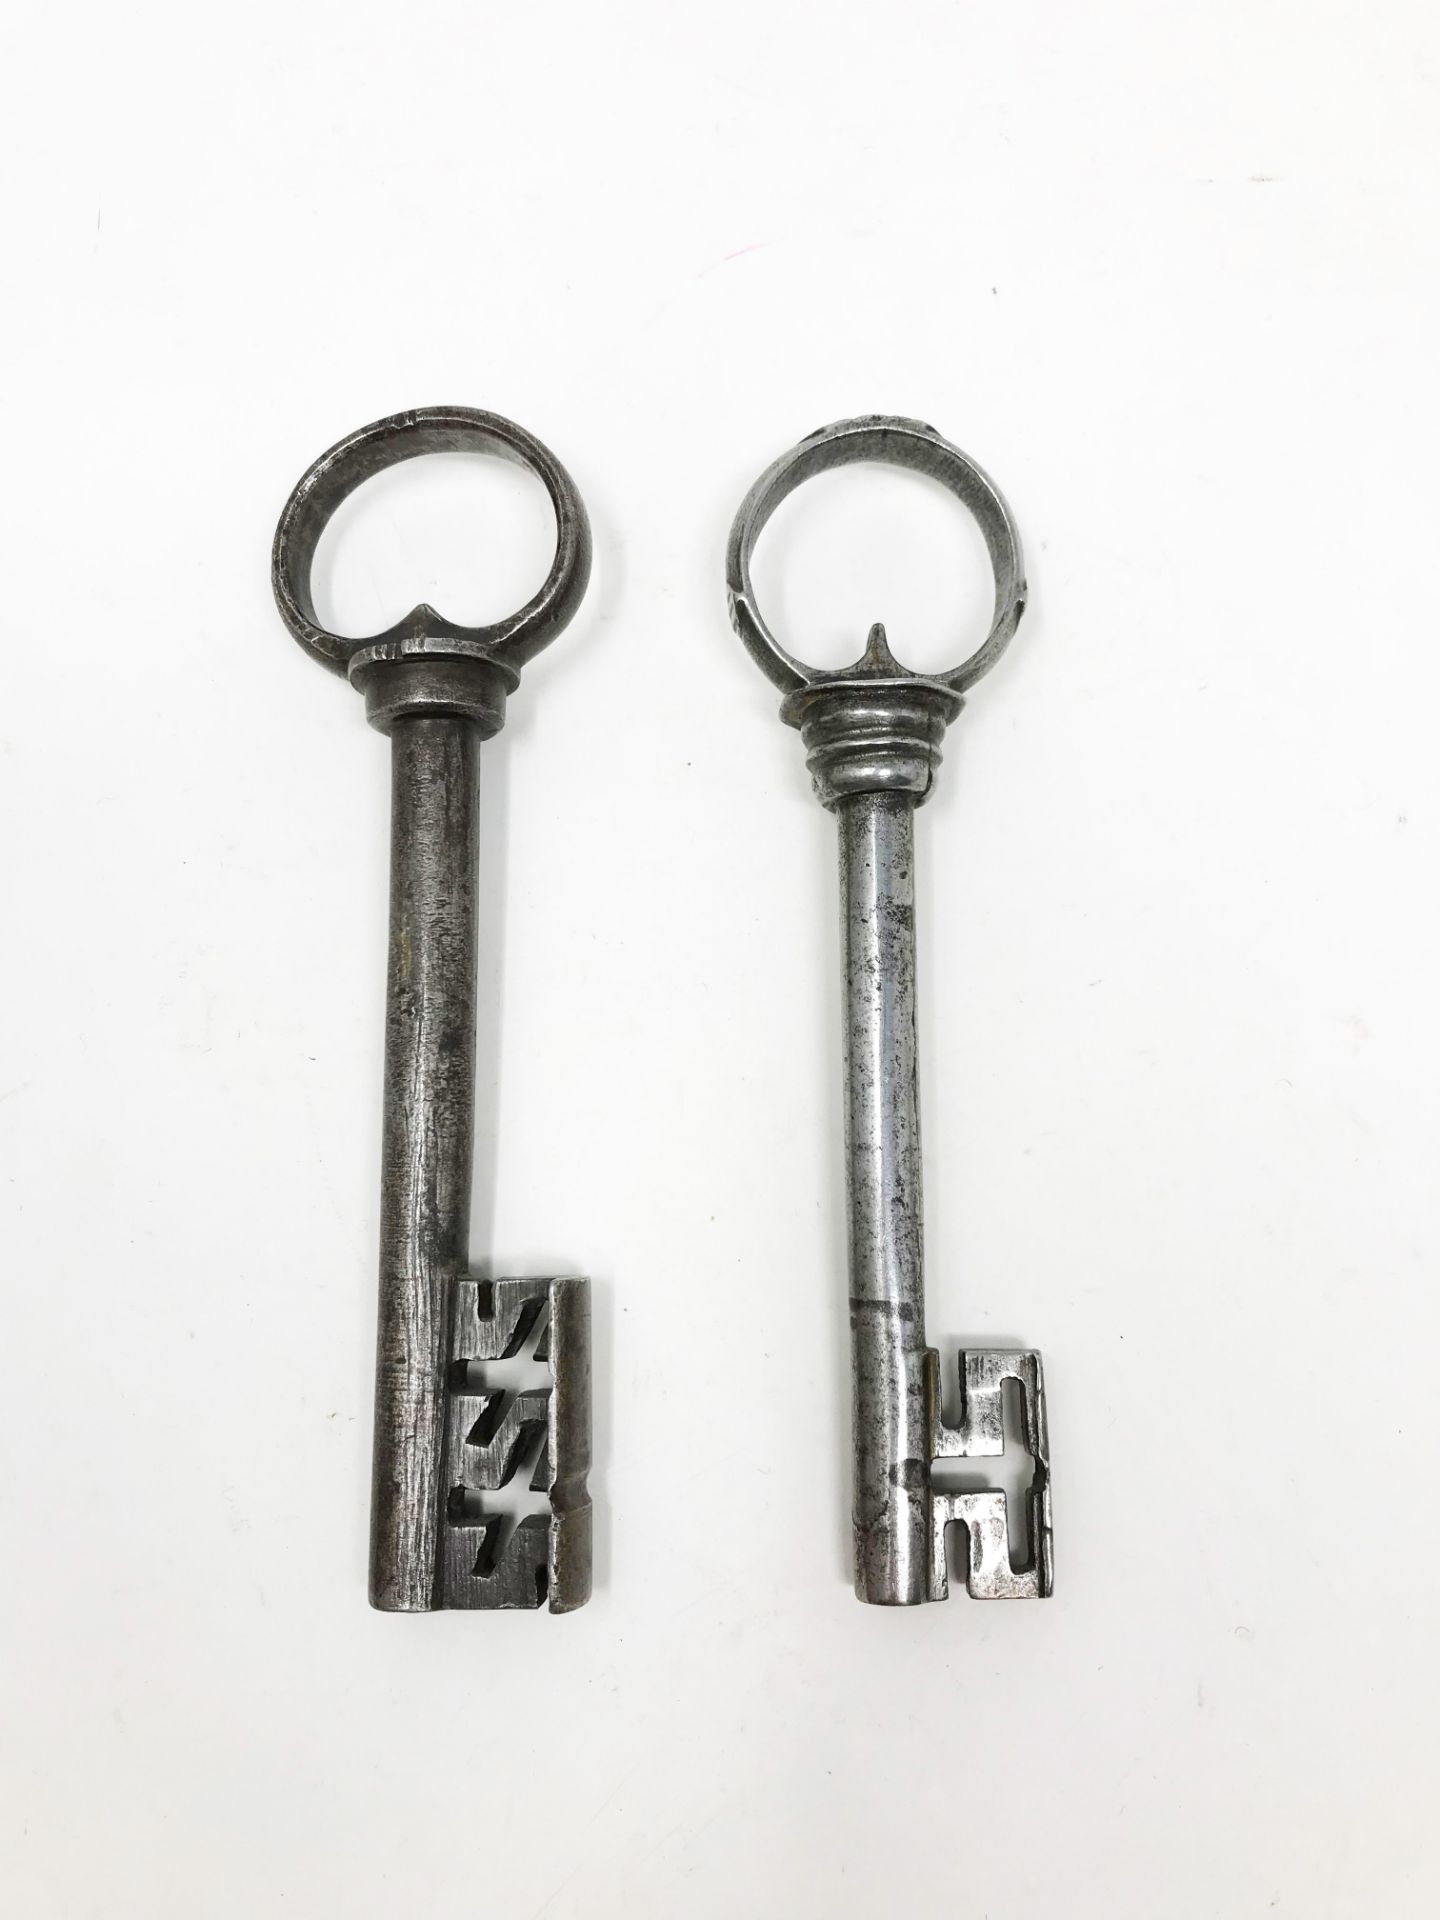 Two German keys14.80 and 14.35 cmPart of the chapter "From beyond the Rhine".